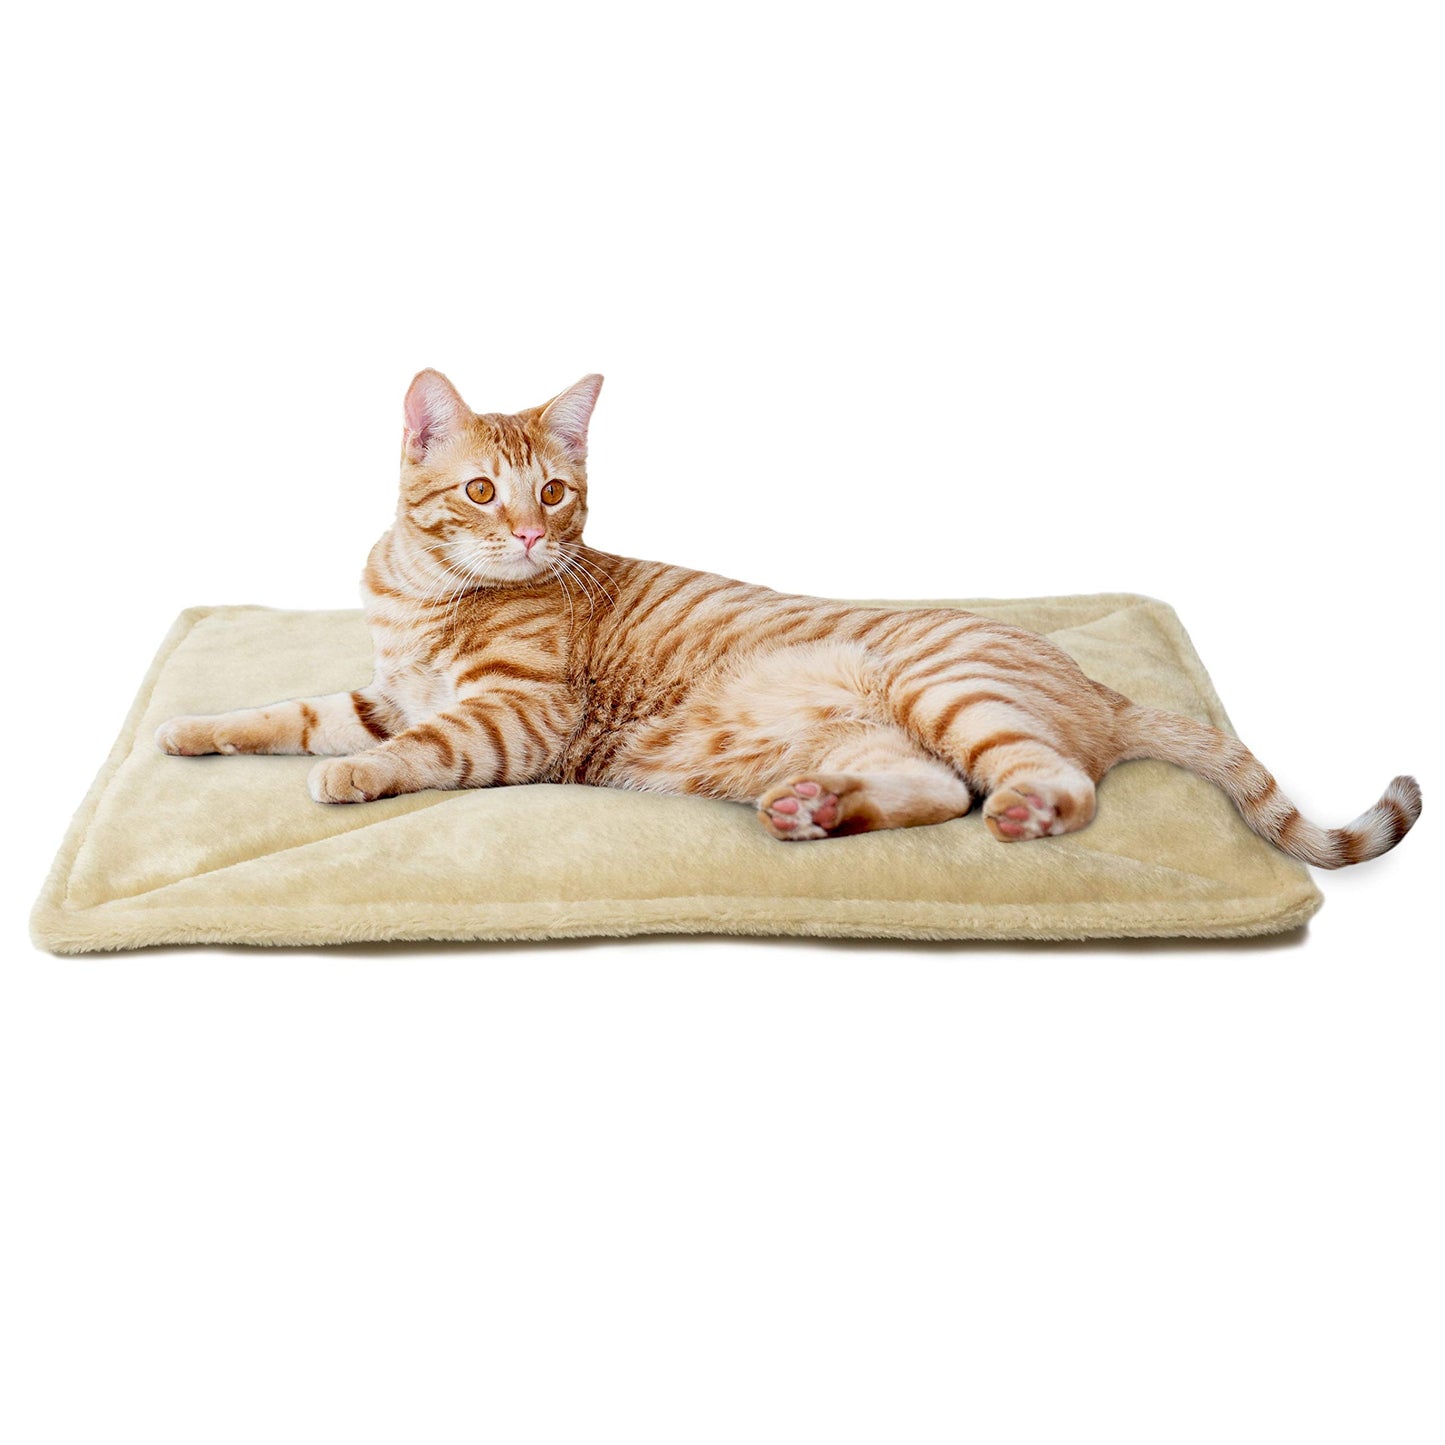 Furhaven ThermaNAP Self-Warming Cat Bed for Indoor Cats & Small Dogs, Washable & Reflects Body Heat - Quilted Faux Fur Reflective Bed Mat - Cream, Small